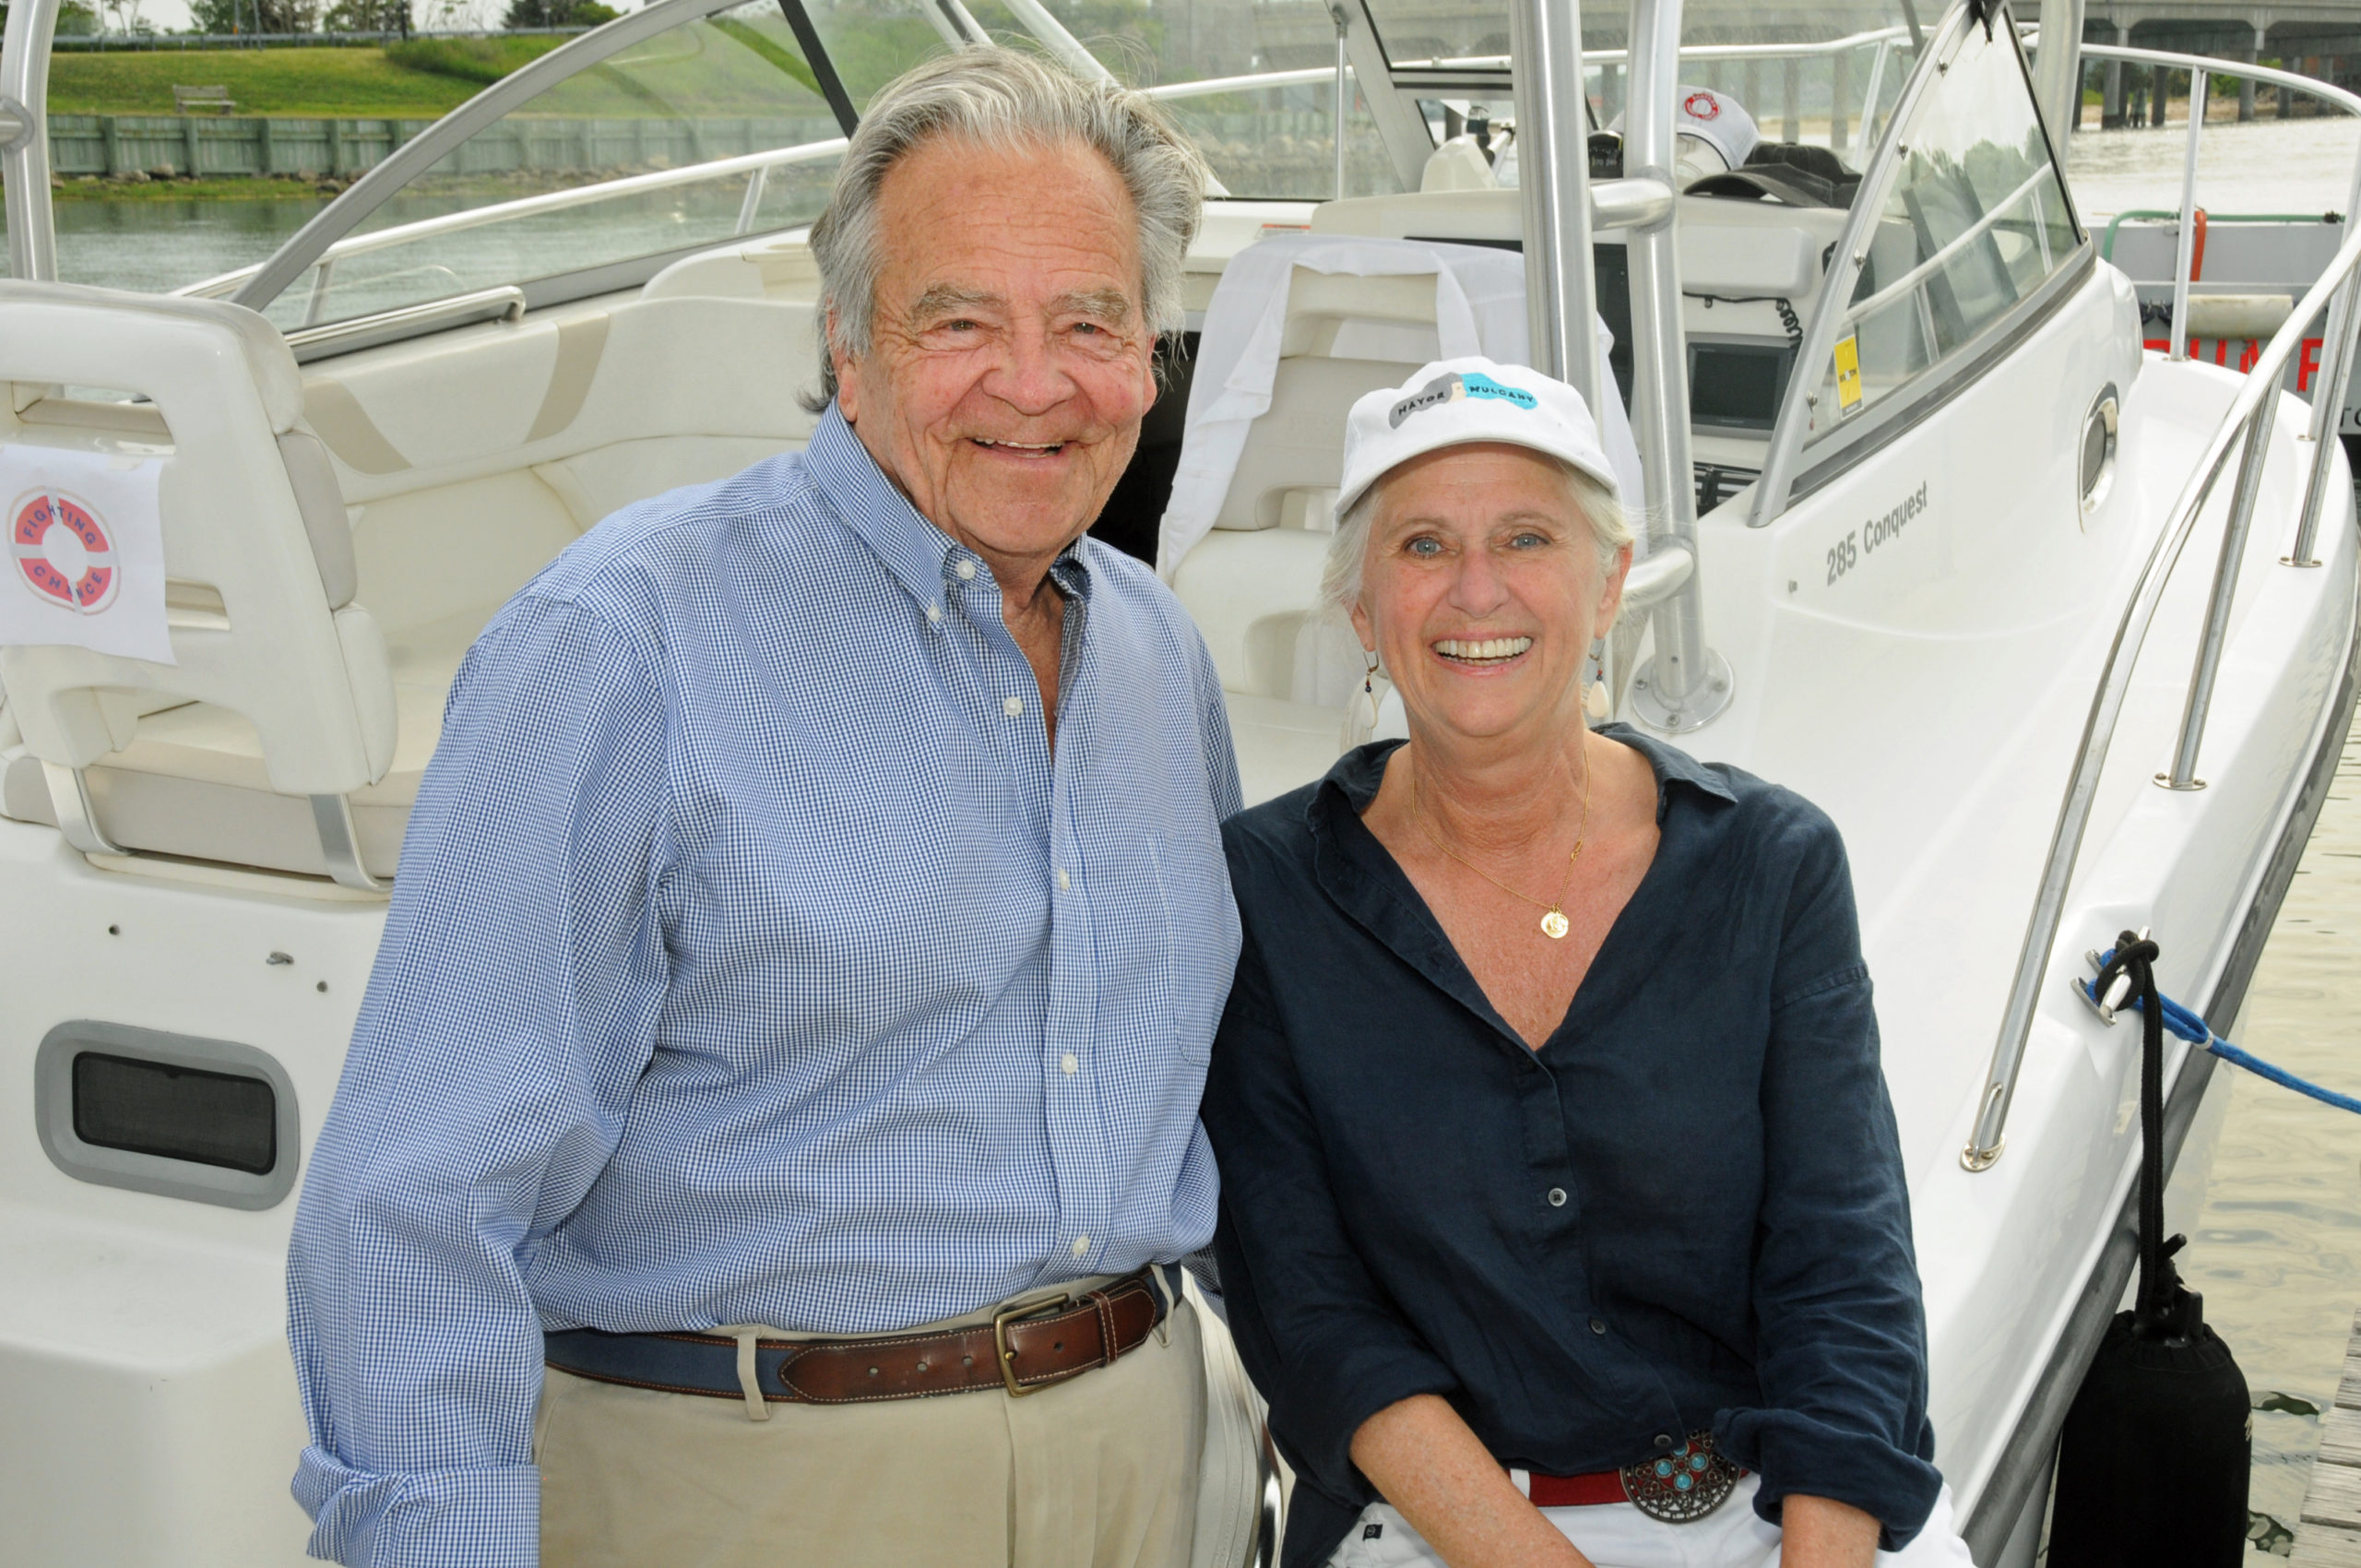 Former East Hampton Village Mayor Paul Rickenbach with Sag Harbor Mayor Kathleen Mulcahy at the 2021 Boaters Against Cancer  fundraiser,  a sunset cruise from Long Wharf to Dering Harbor and back to benefit Fighting Chance, on Sunday evening.   RICHARD LEWIN